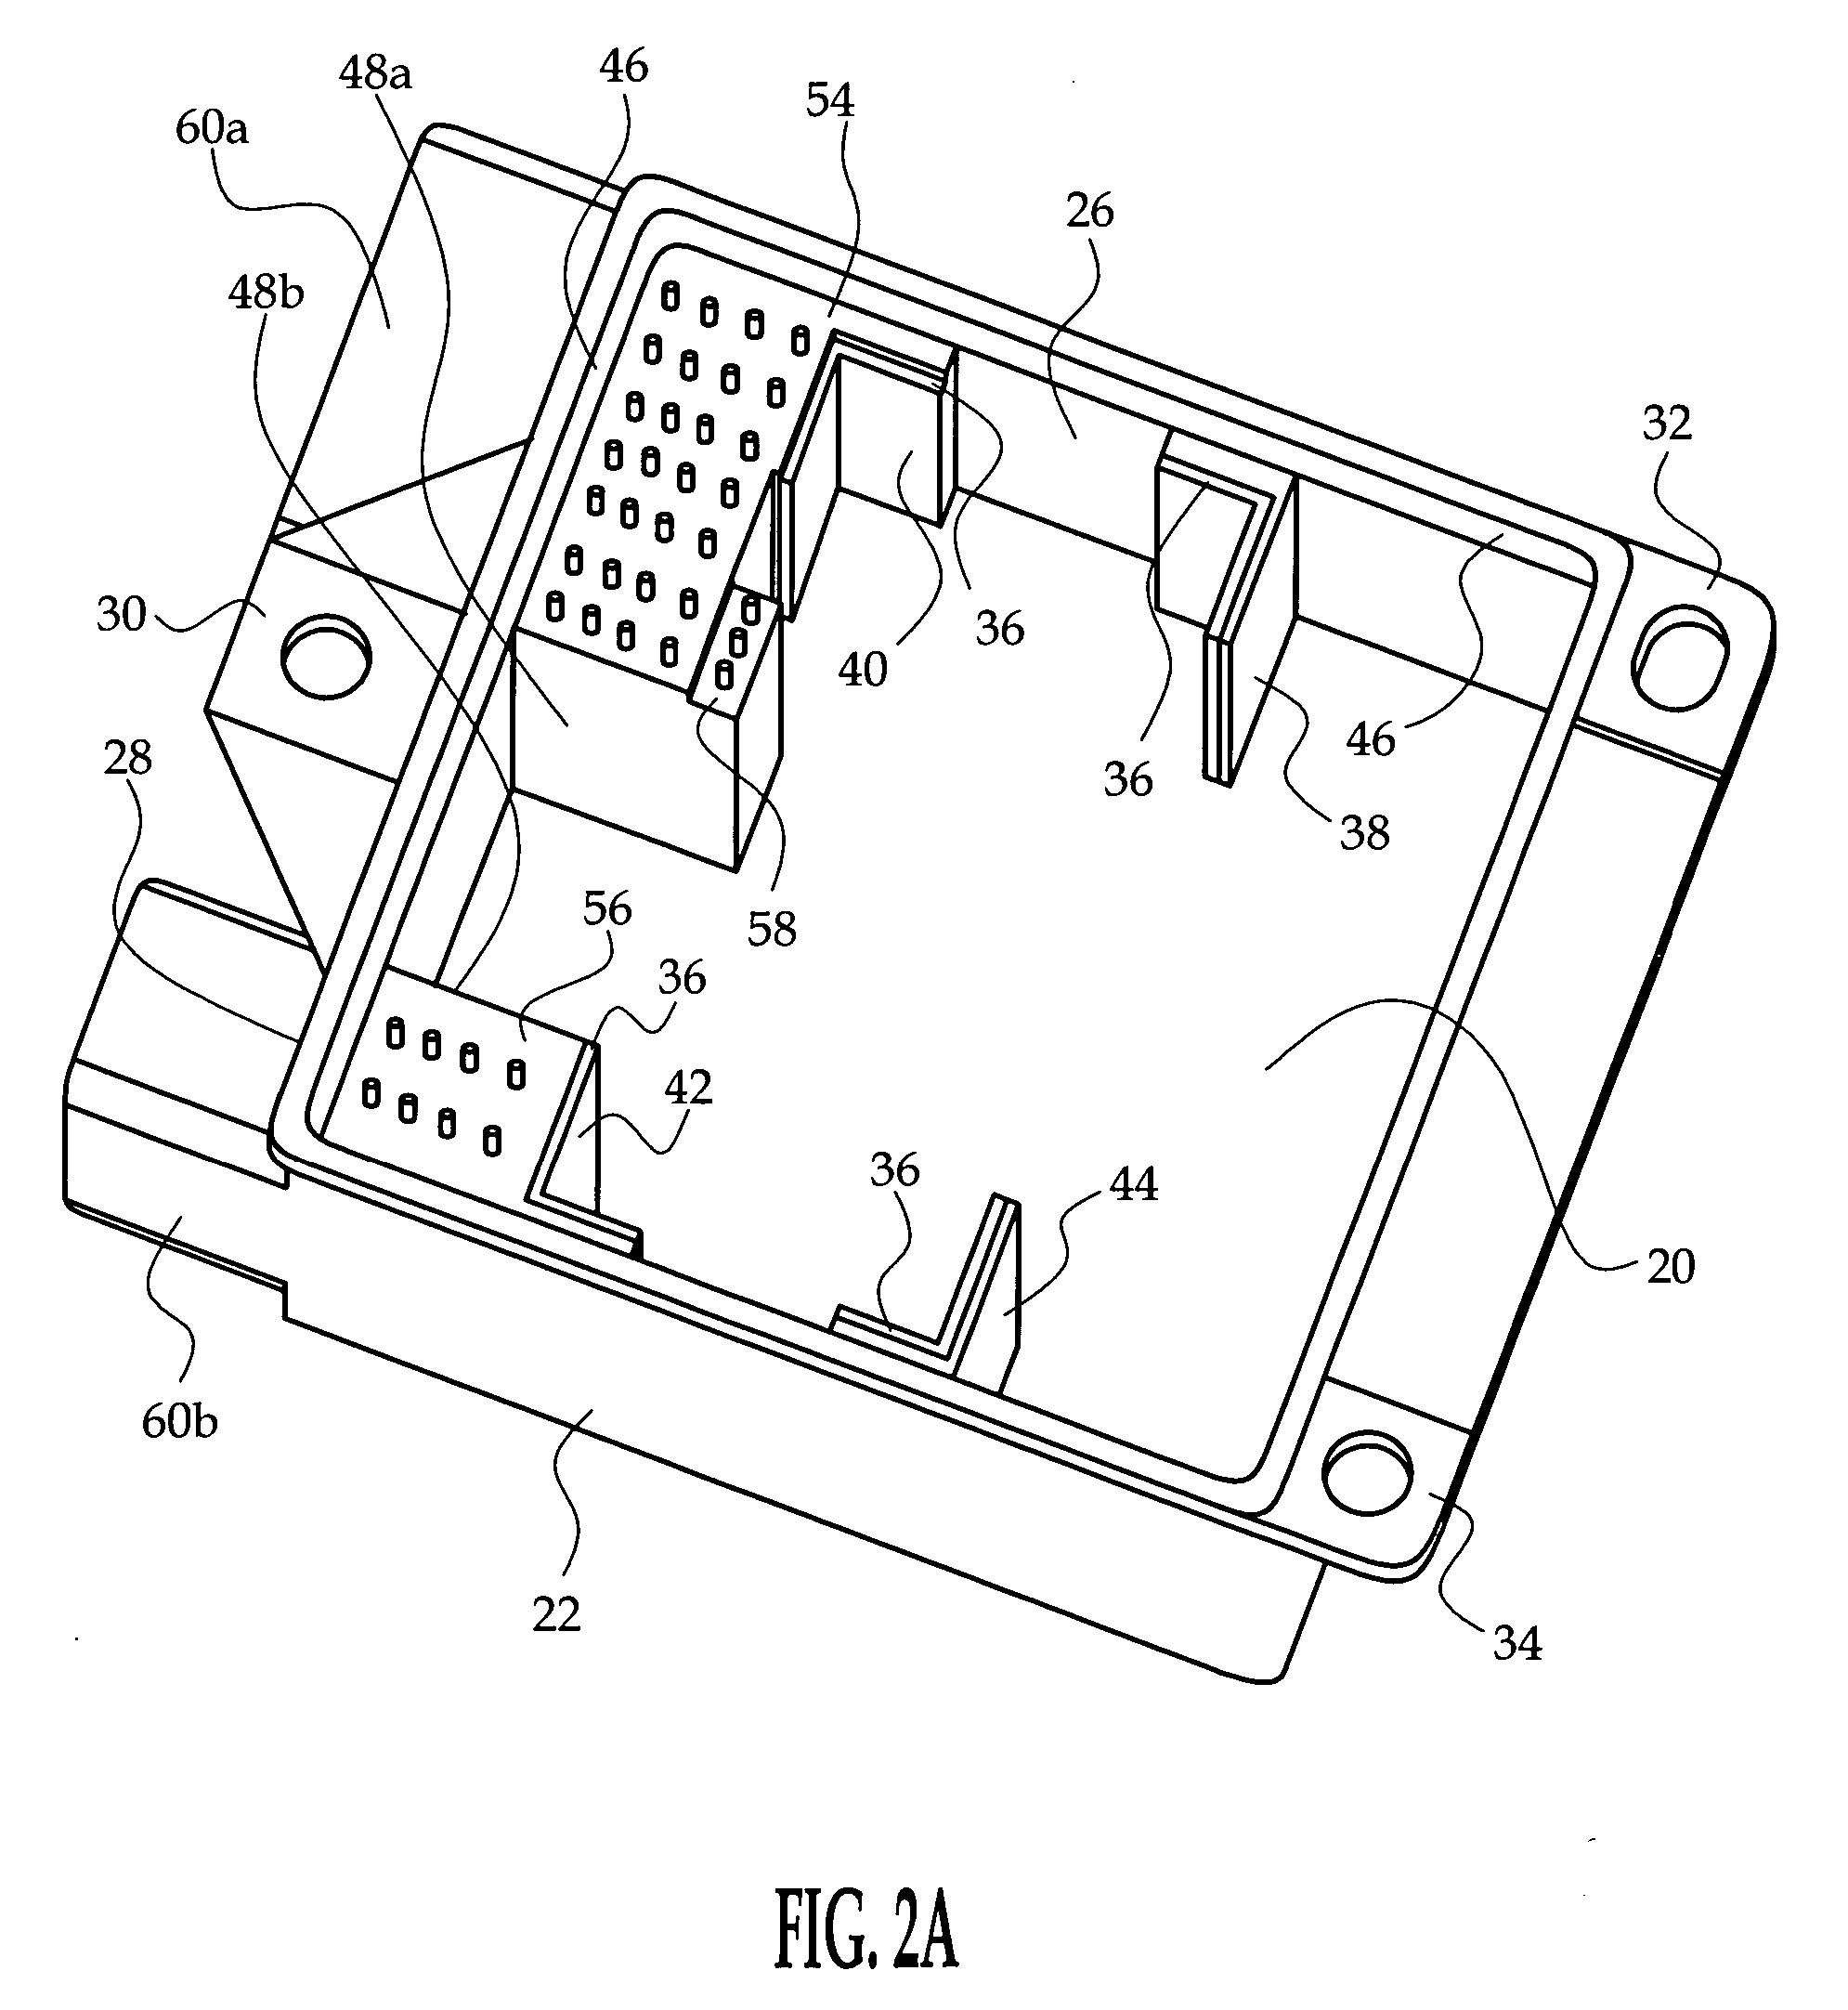 Sealed fastenerless multi-board electronic module and method of manufacture